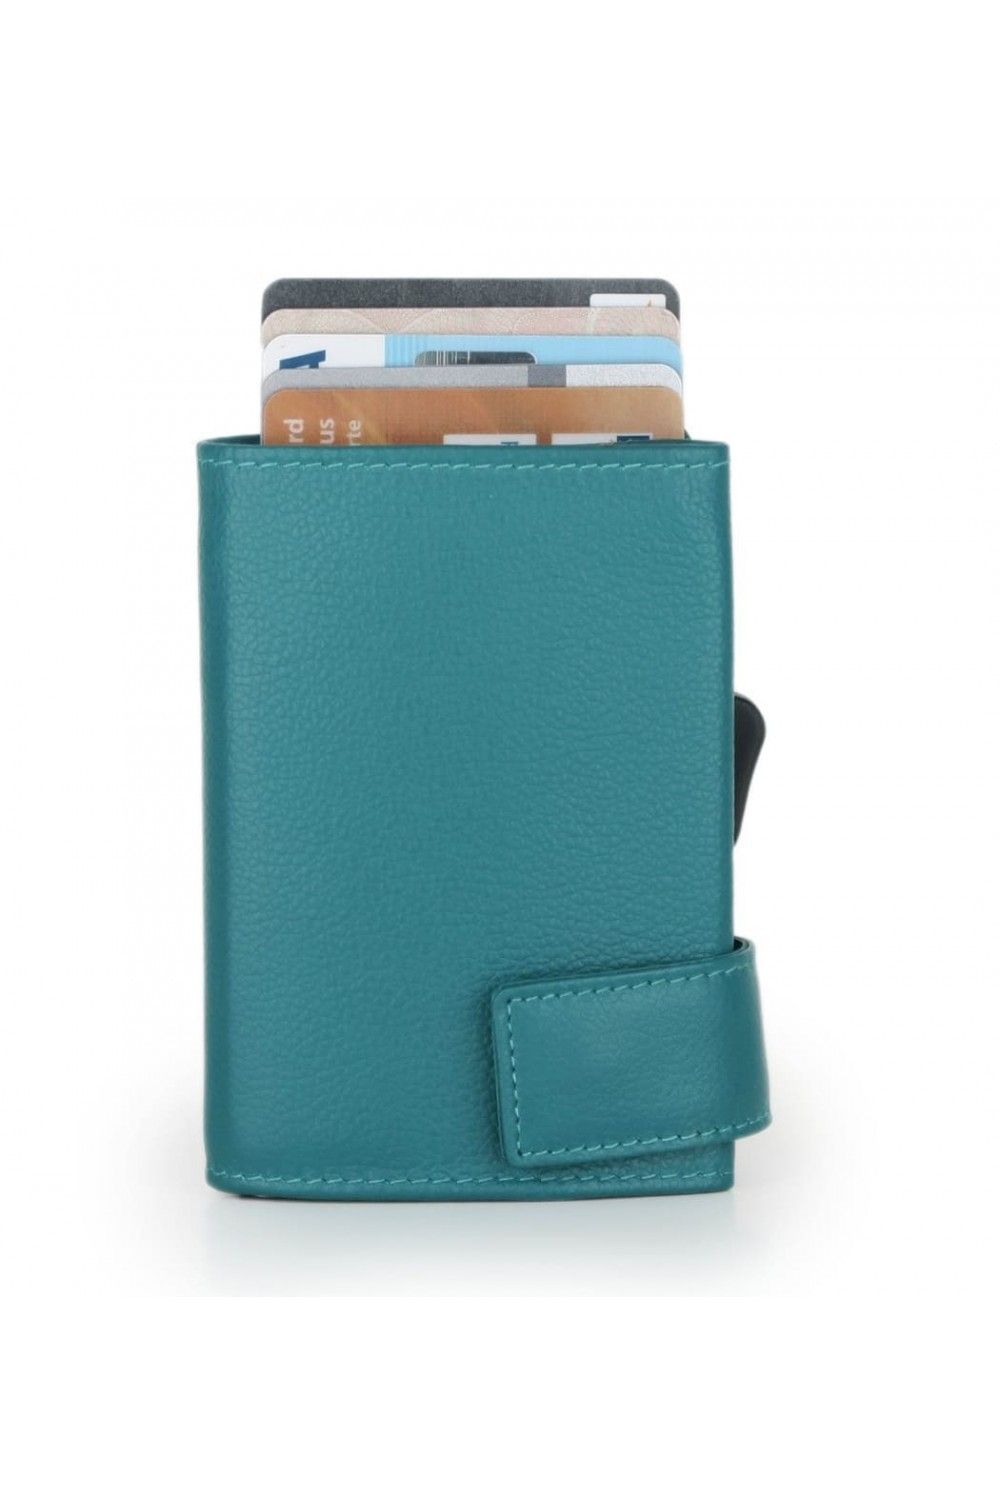 Porte-cartes SecWal RV Leather turquoise